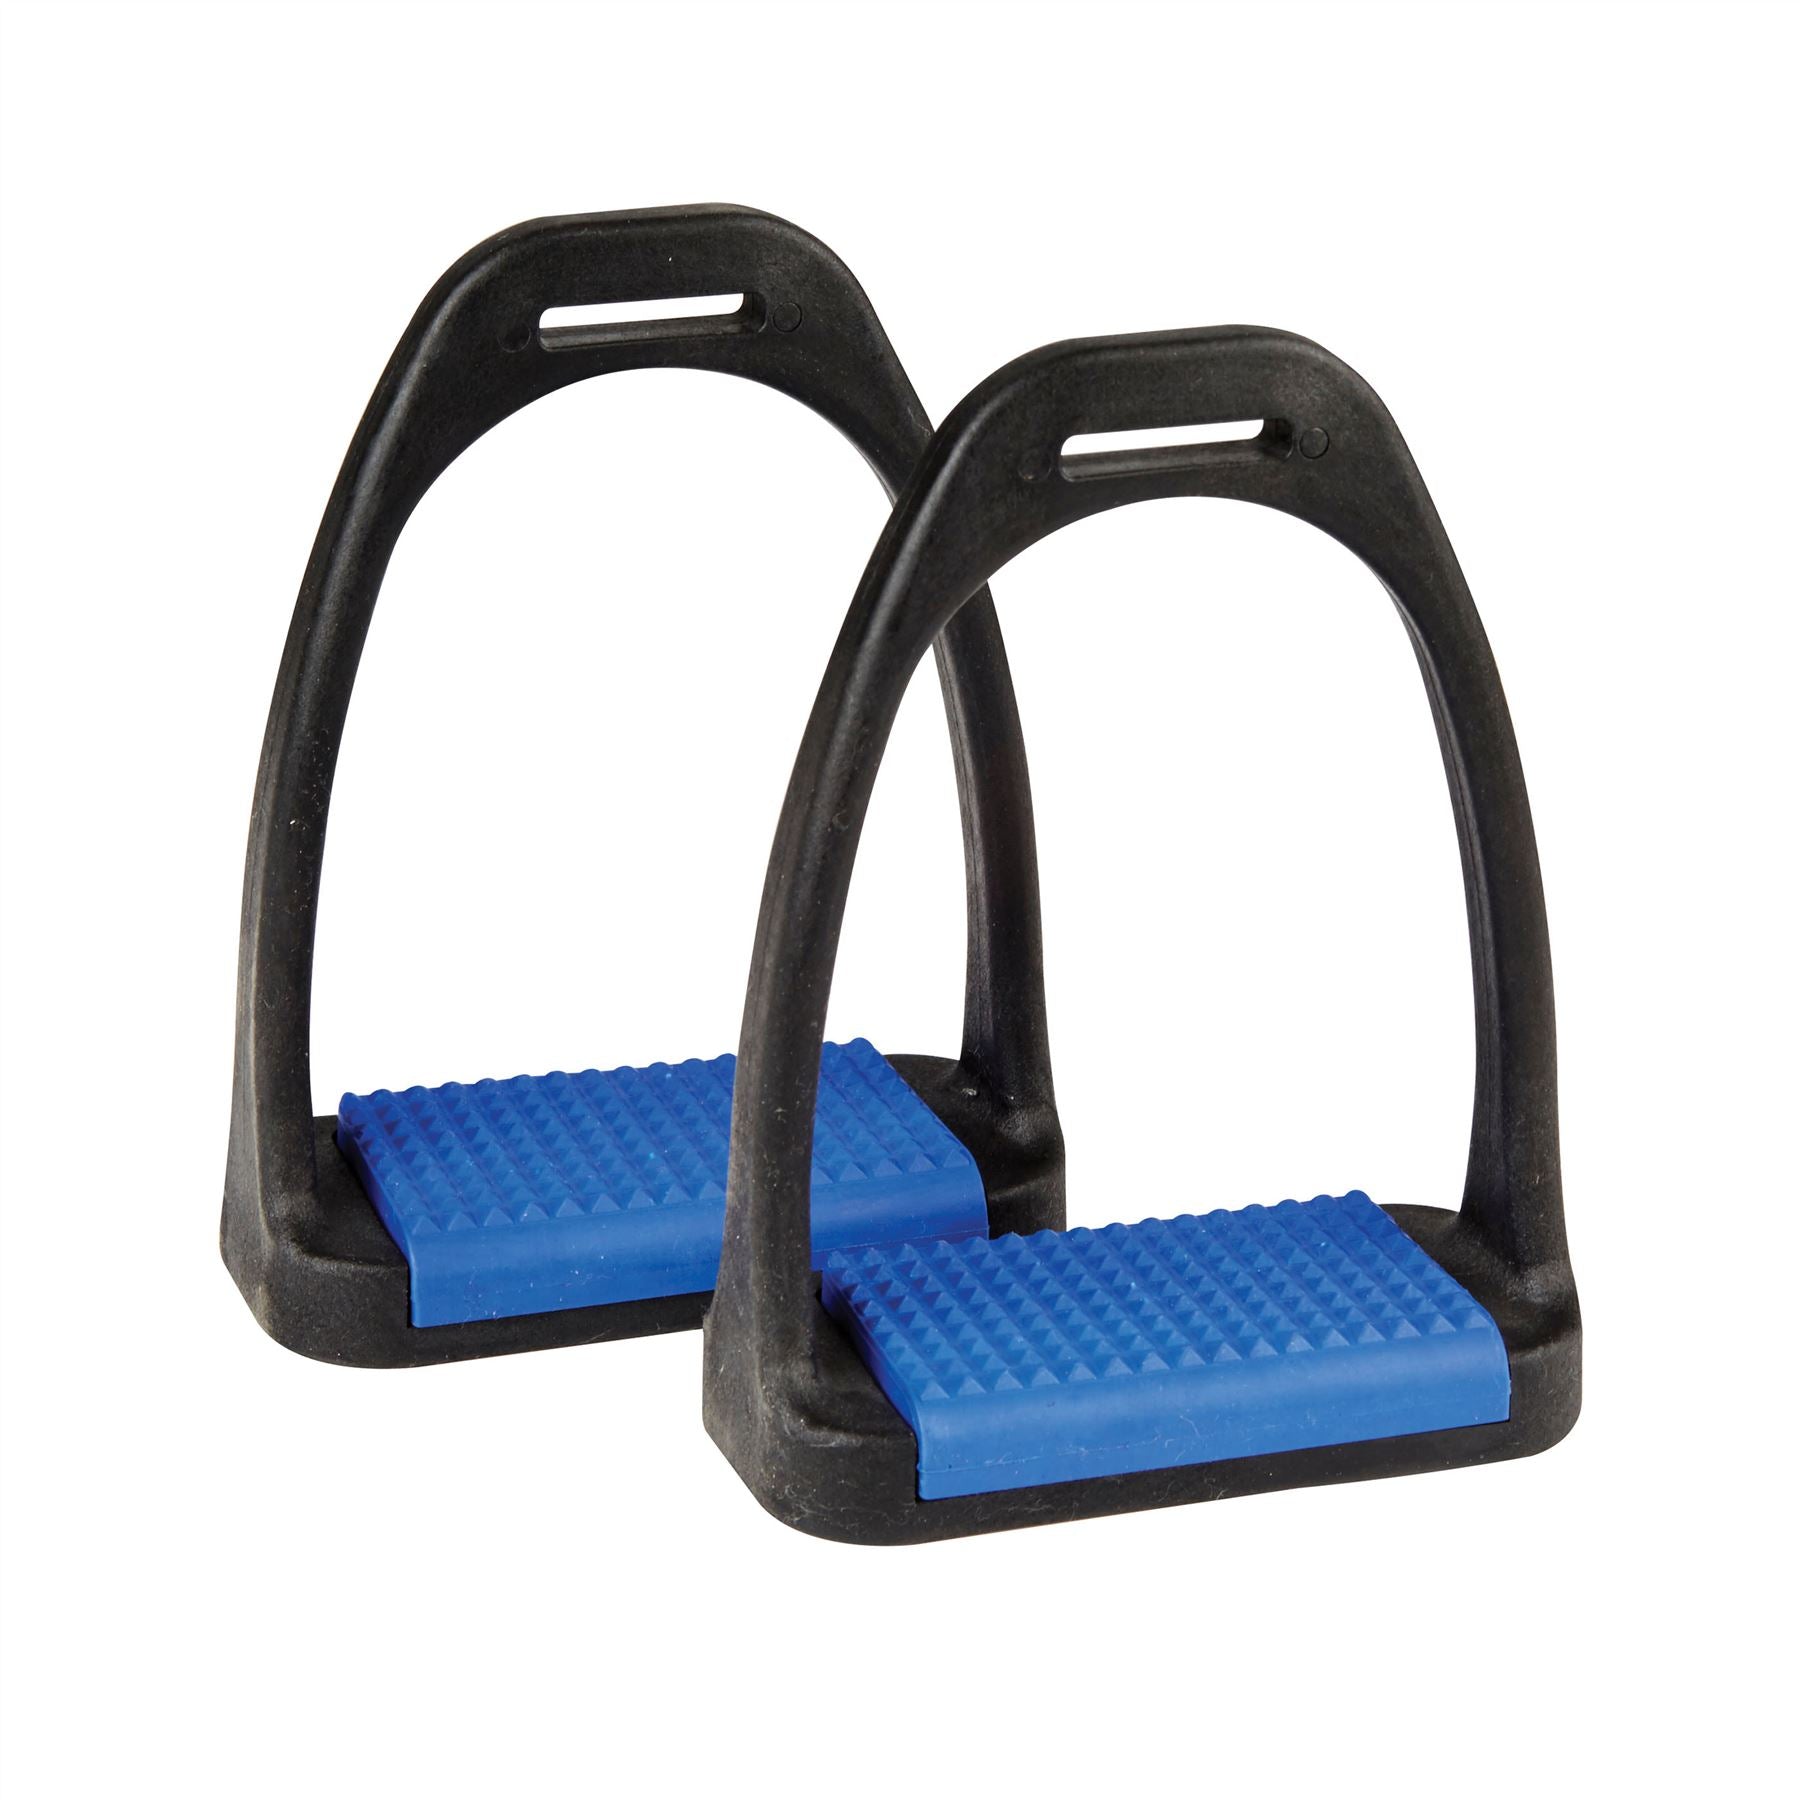 Korsteel Polymer Stirrup Irons With Coloured Treads - Just Horse Riders